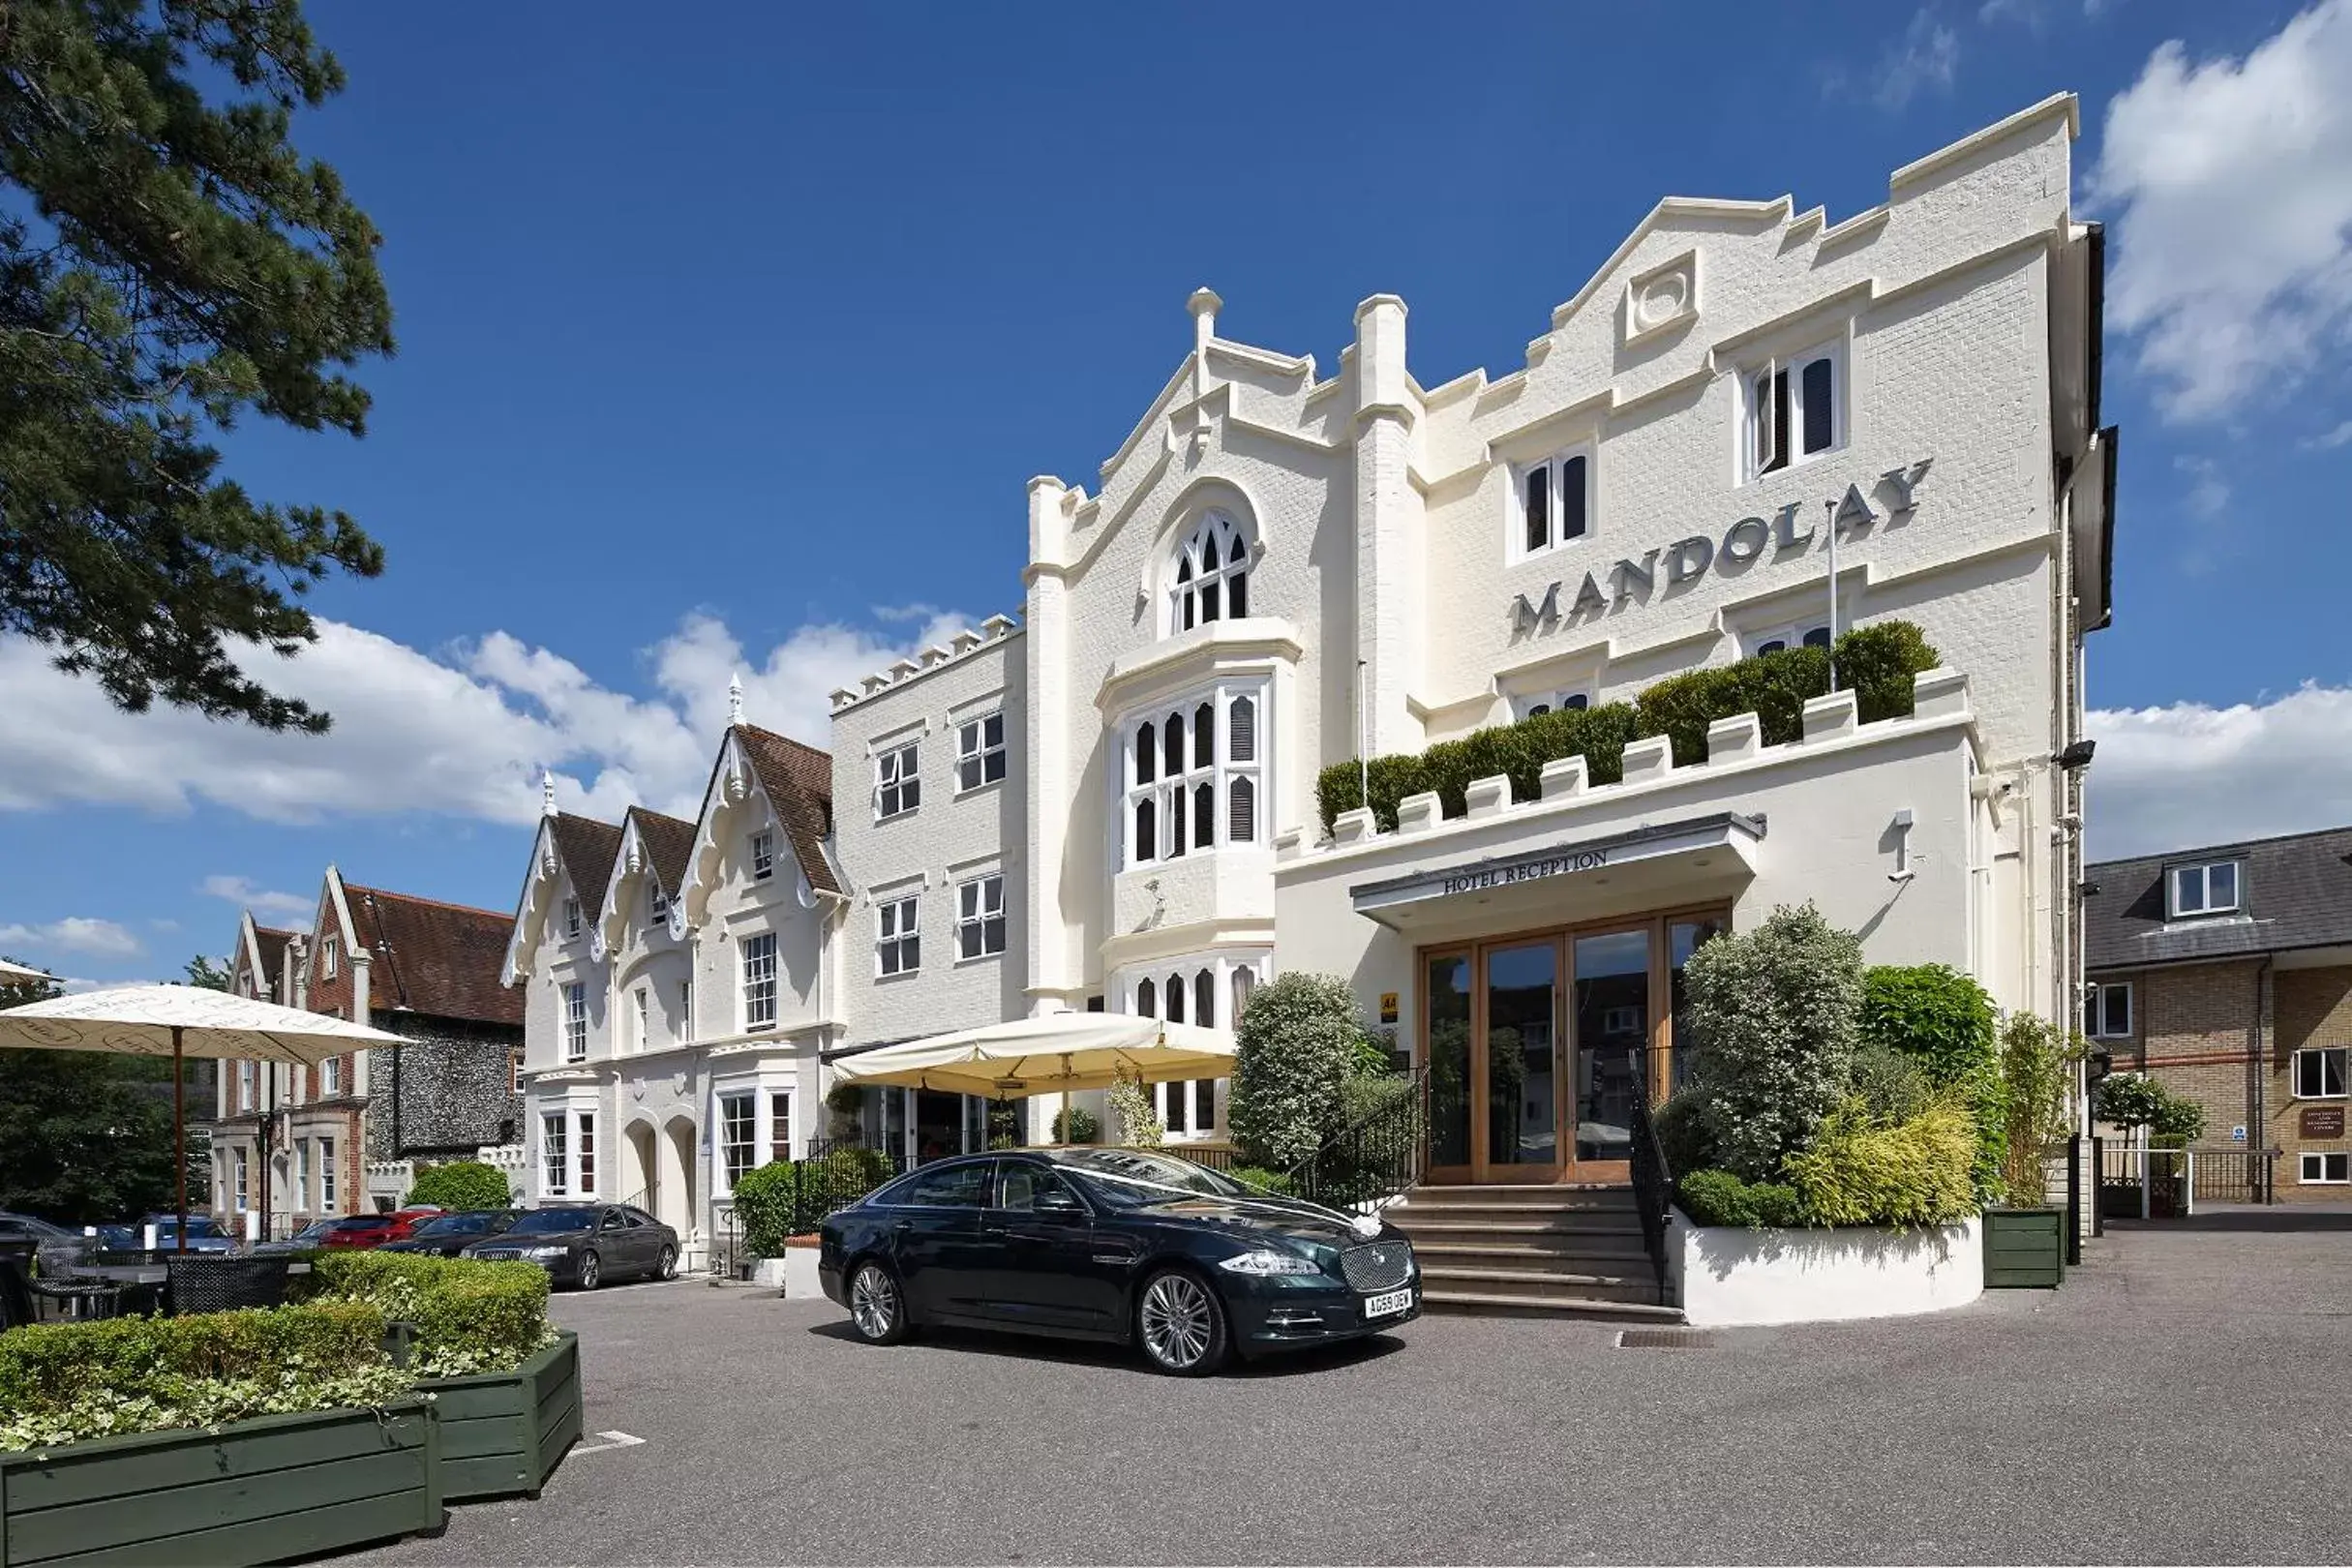 Property building in Mandolay Hotel Guildford